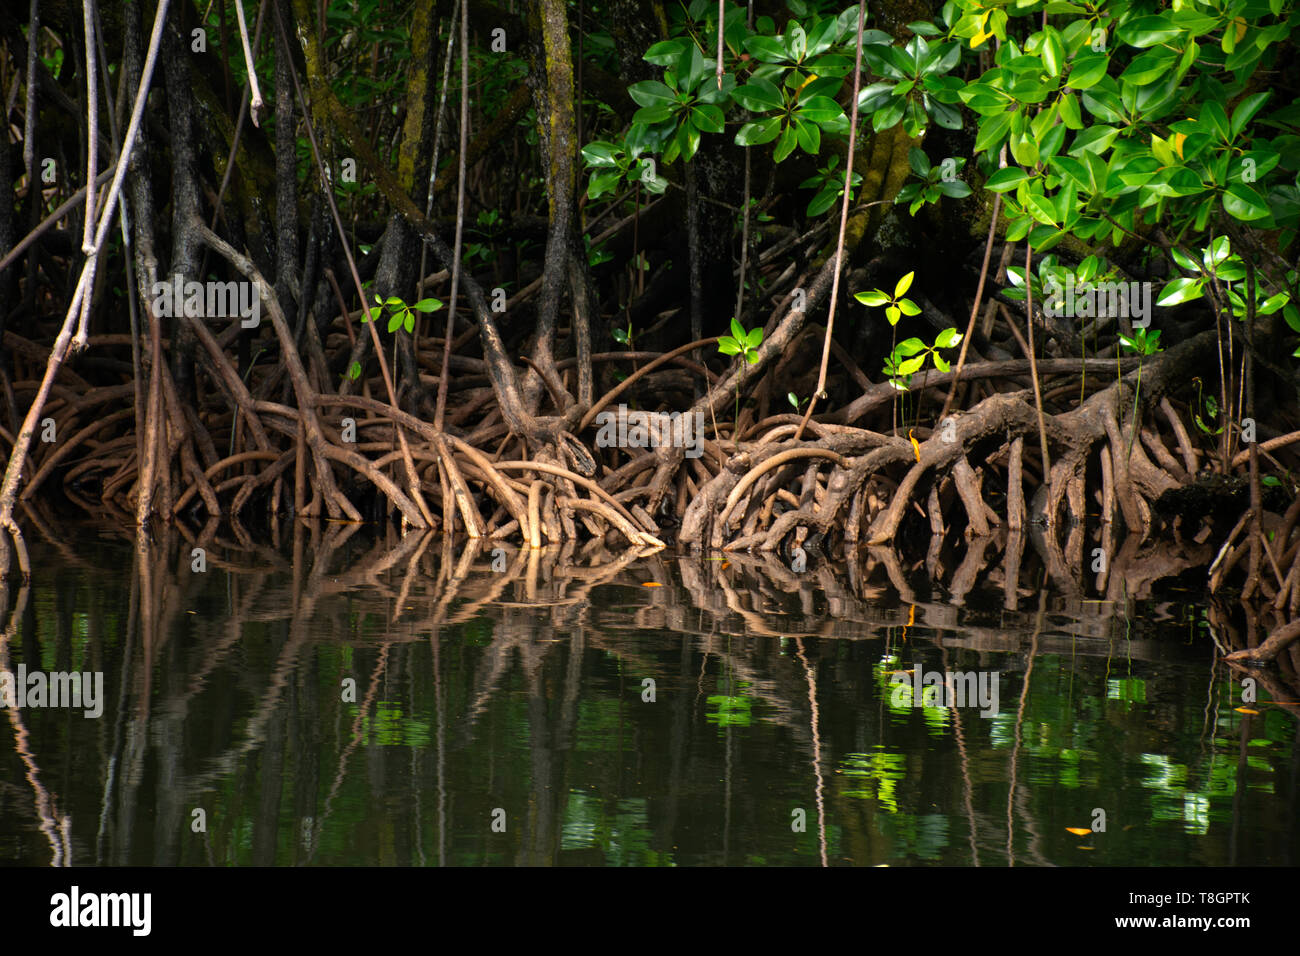 Aerial roots of a mangrove tree, Rhizophora sp., Pohnpei, Federated States of Micronesia Stock Photo